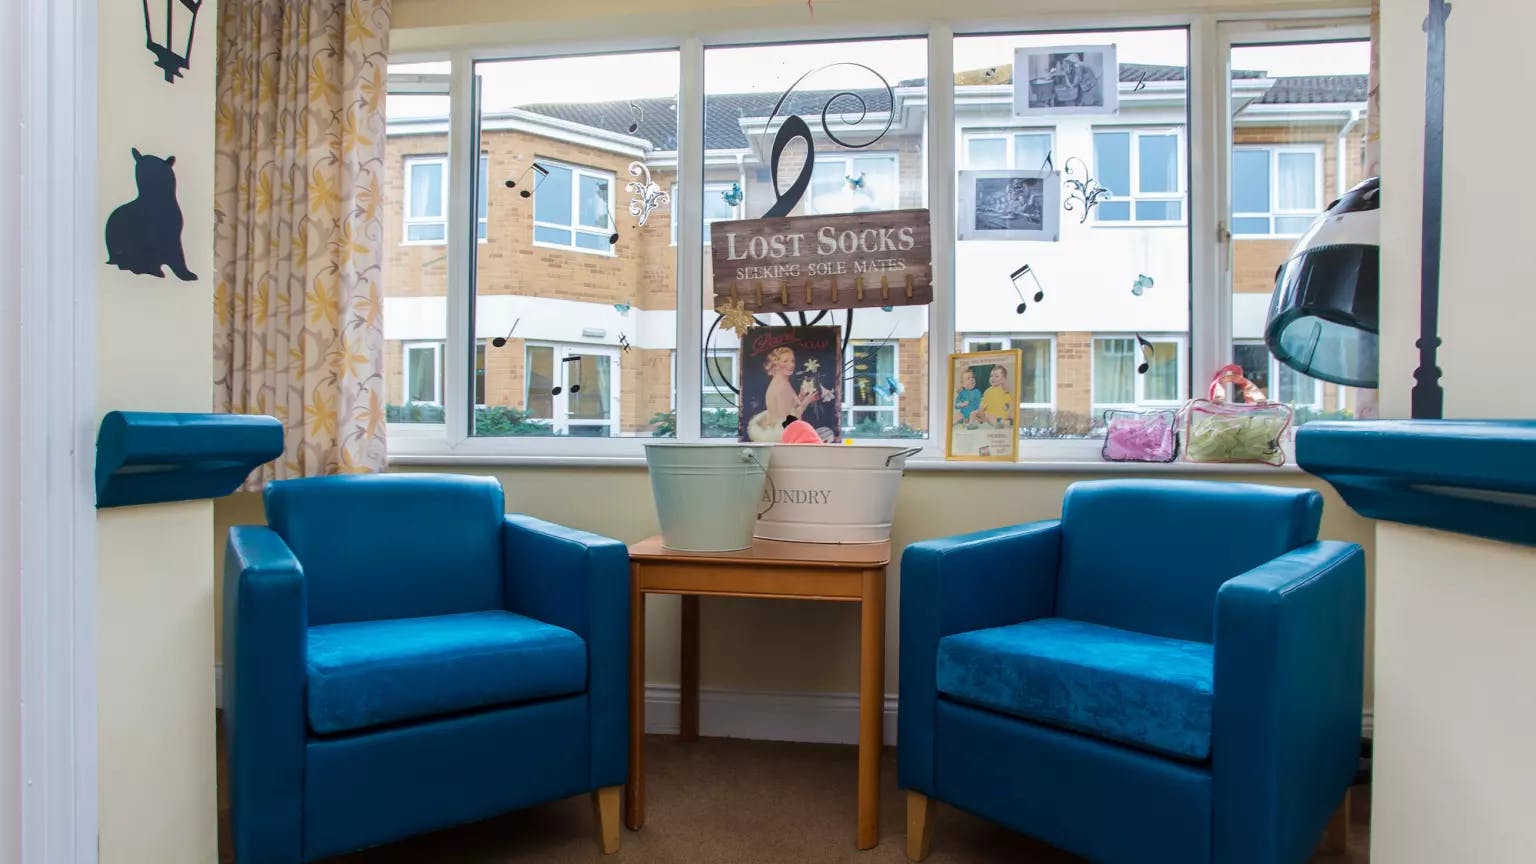 Seating area of Willow Court care home in Harpenden, Hertfordshire